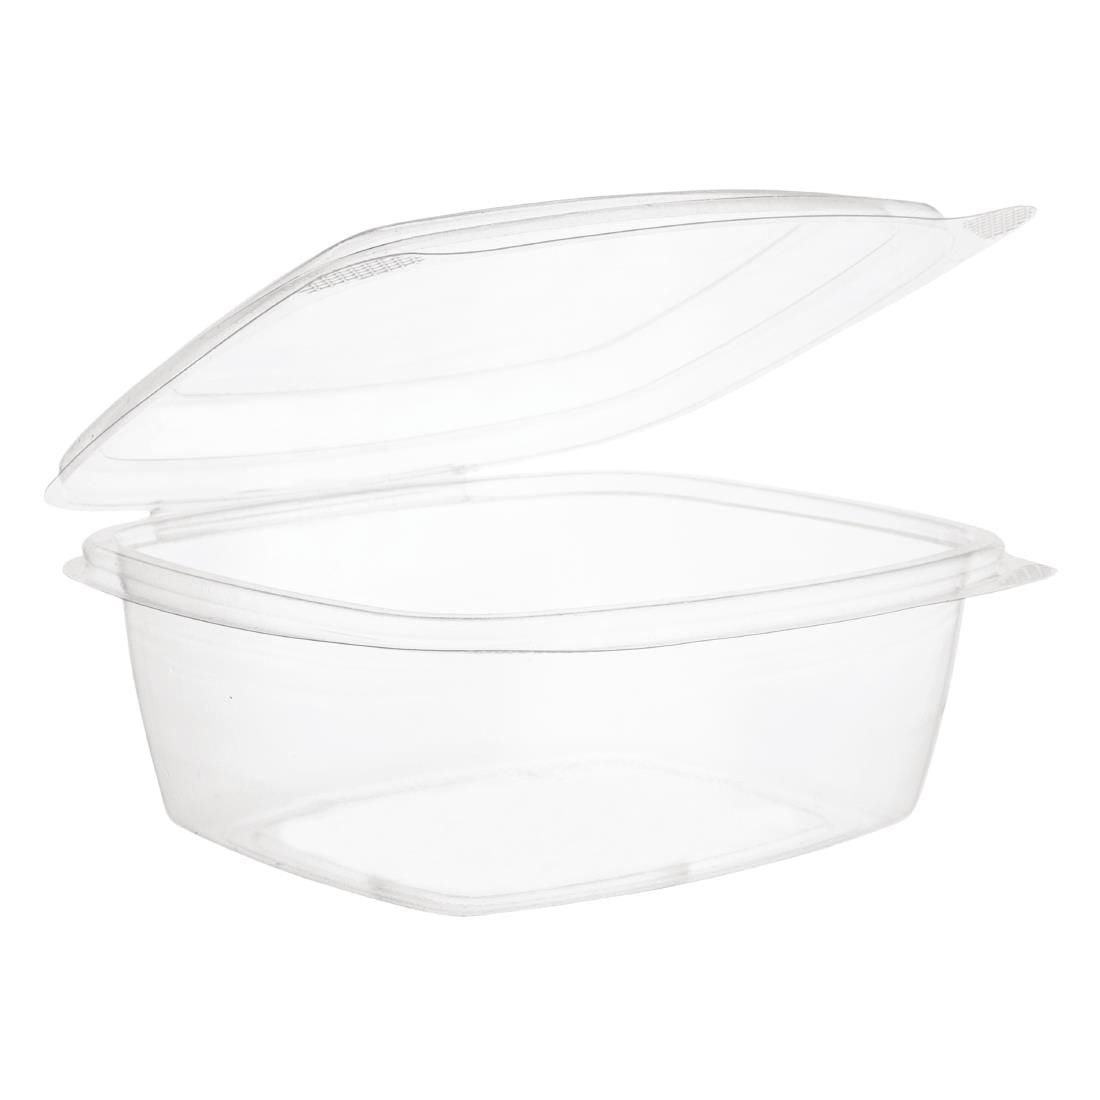 Vegware Compostable Hinged-Lid Deli Containers 680ml / 24oz (Pack of 200)